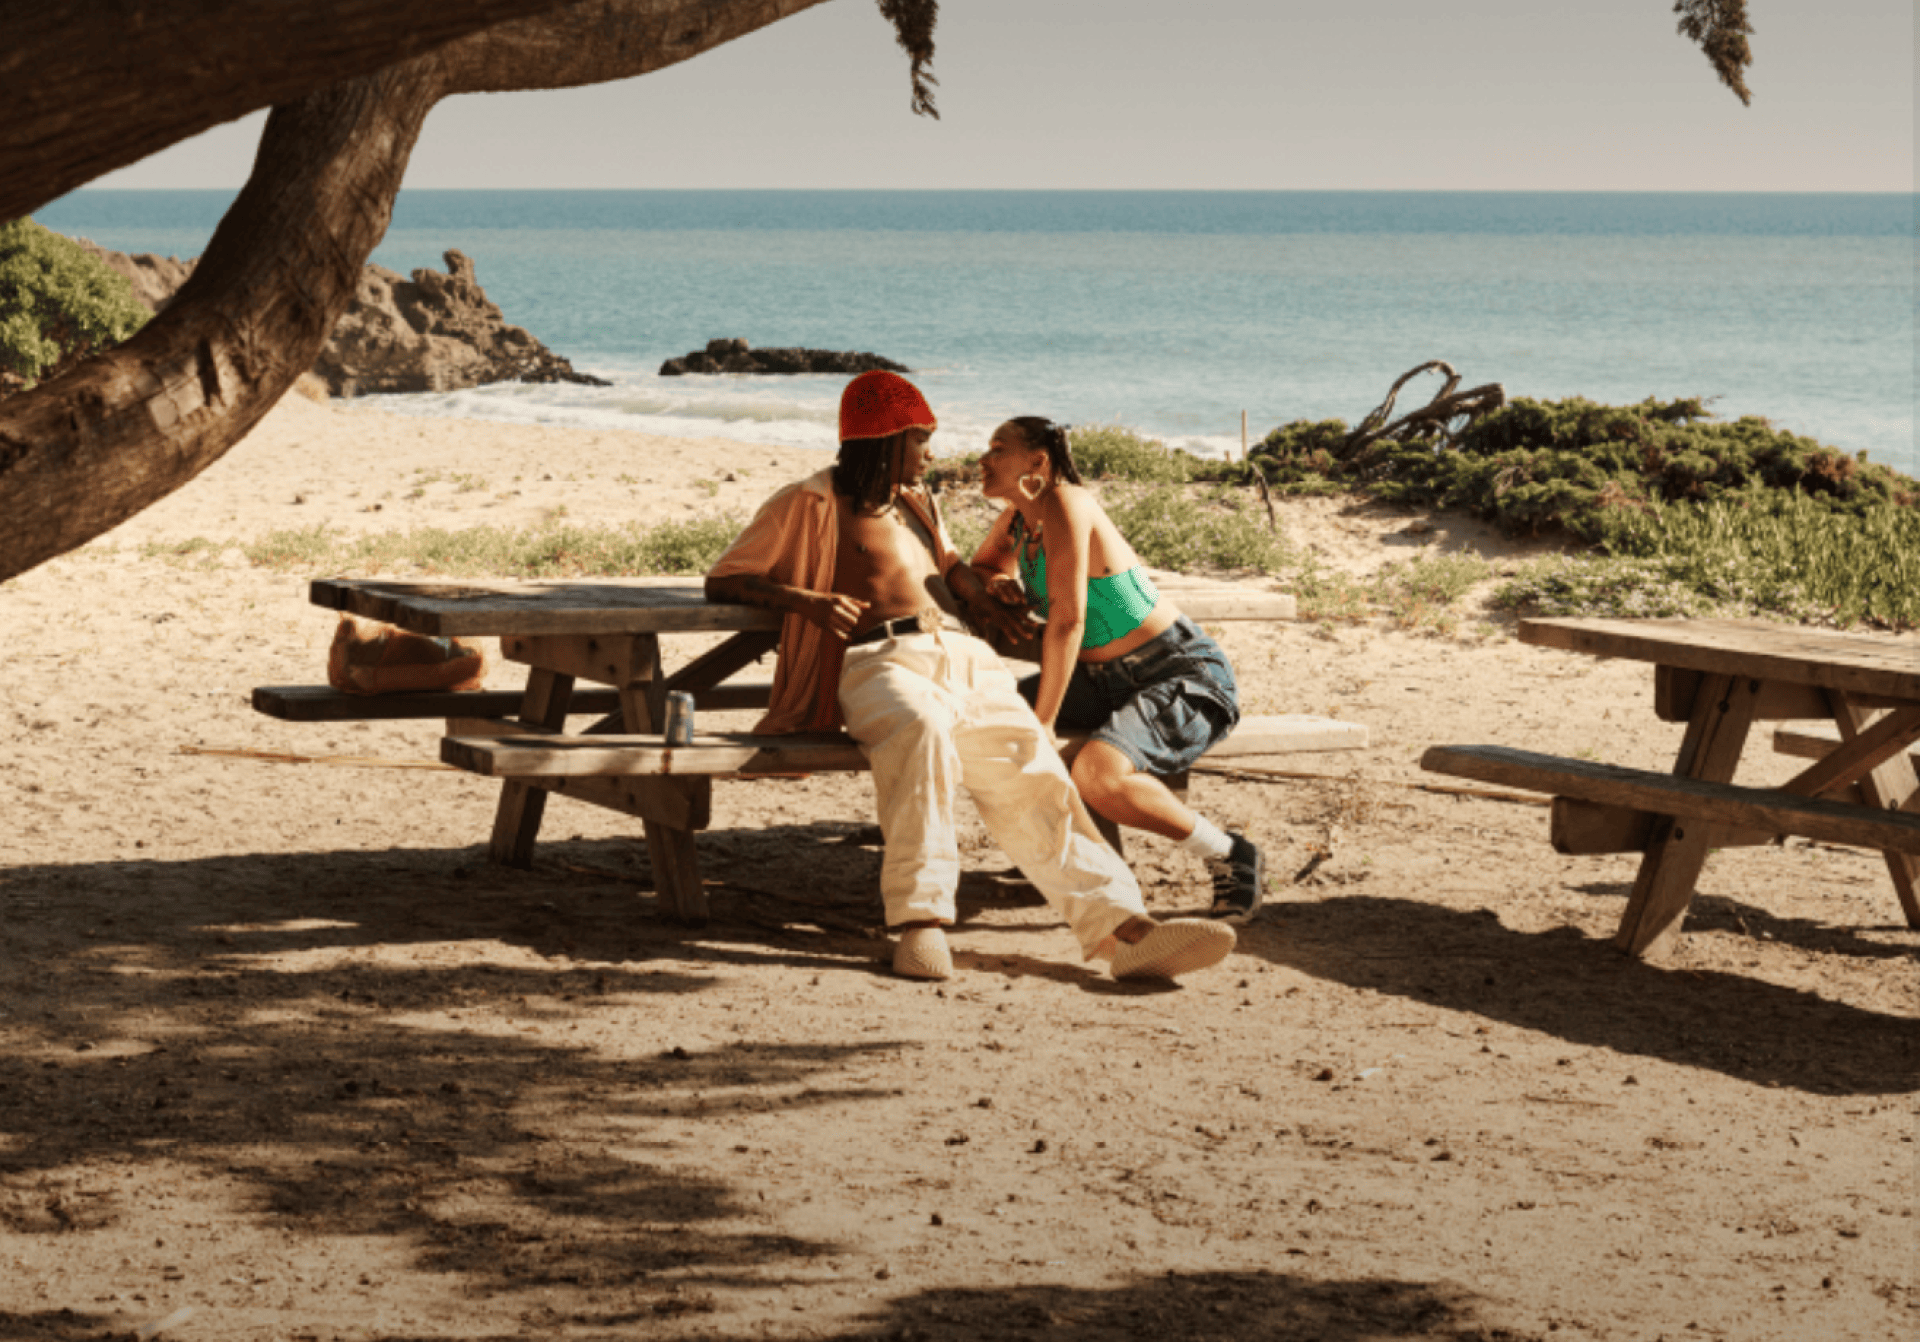 A couple on a picnic table at the beach enjoying a date.